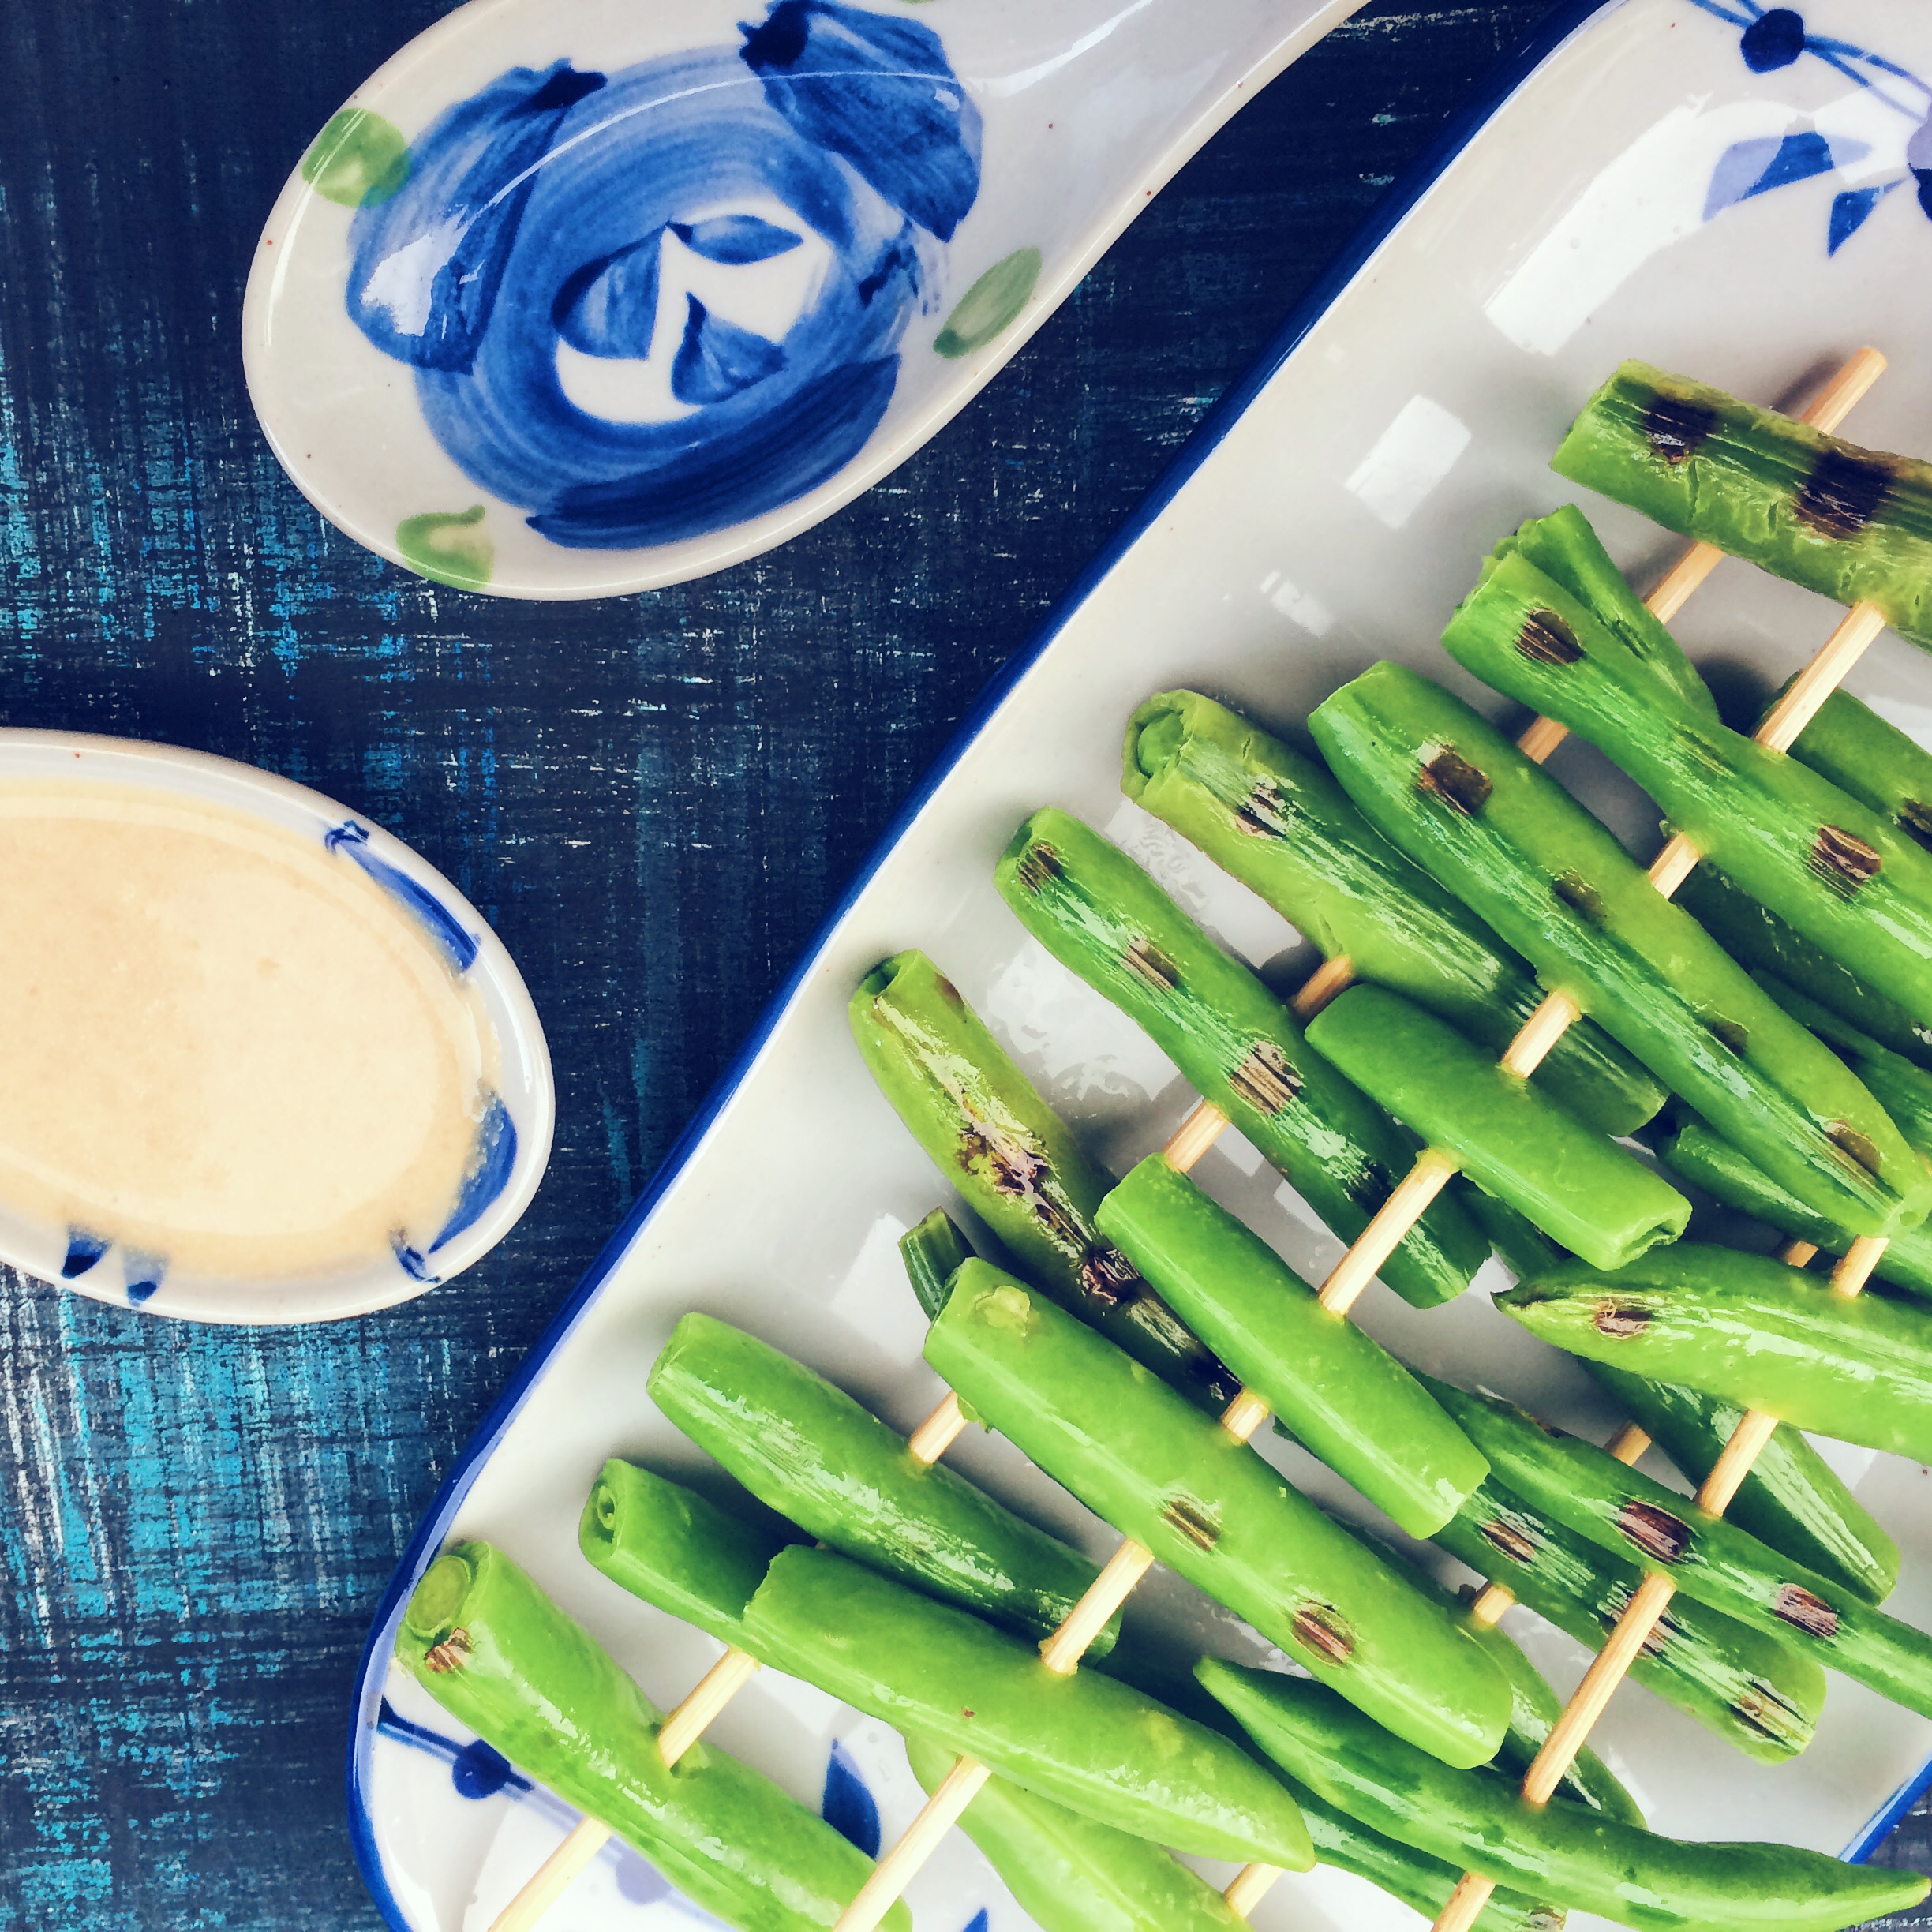 Review of the Thug Kitchen Grilled Snap Peas with Peanut Sauce